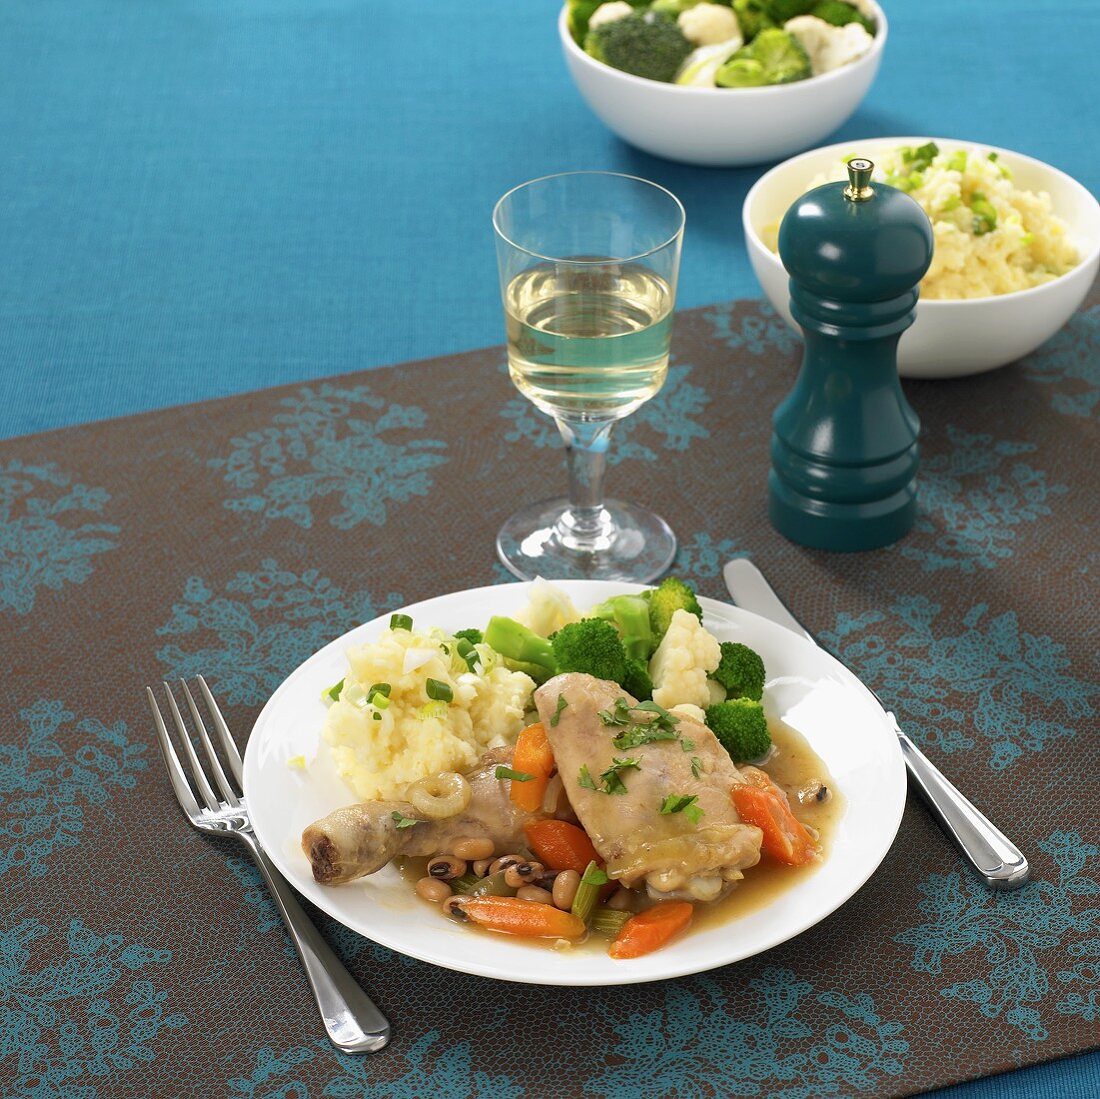 Chicken with vegetables and mashed potato